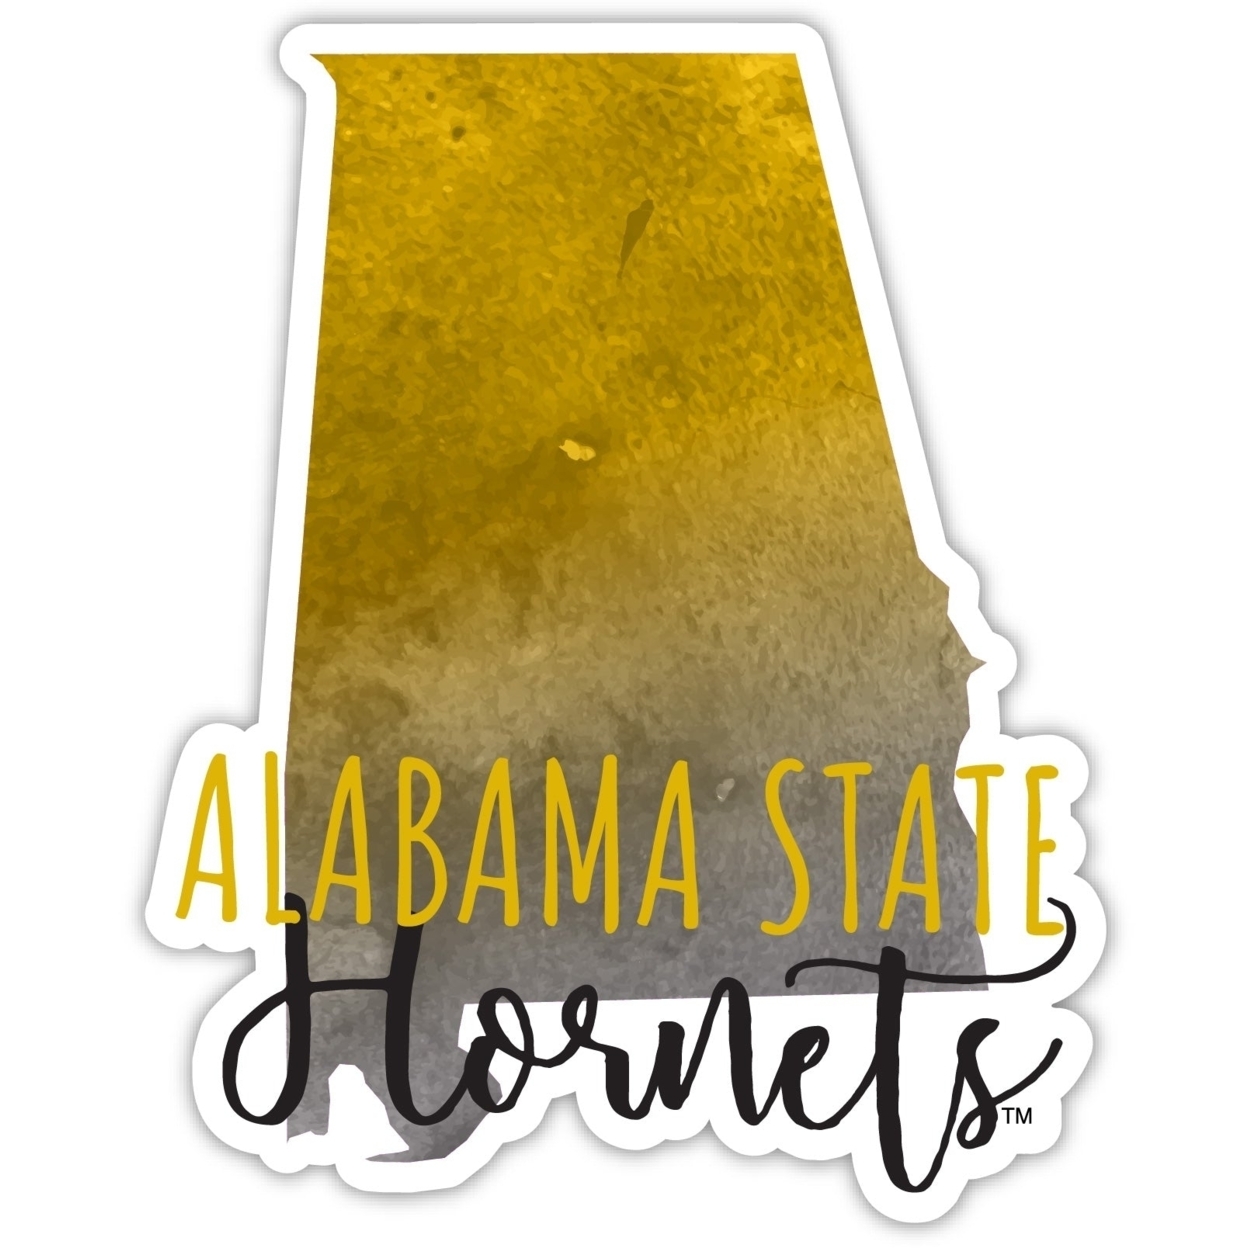 Alabama State University Watercolor State Die Cut Decal 2-Inch